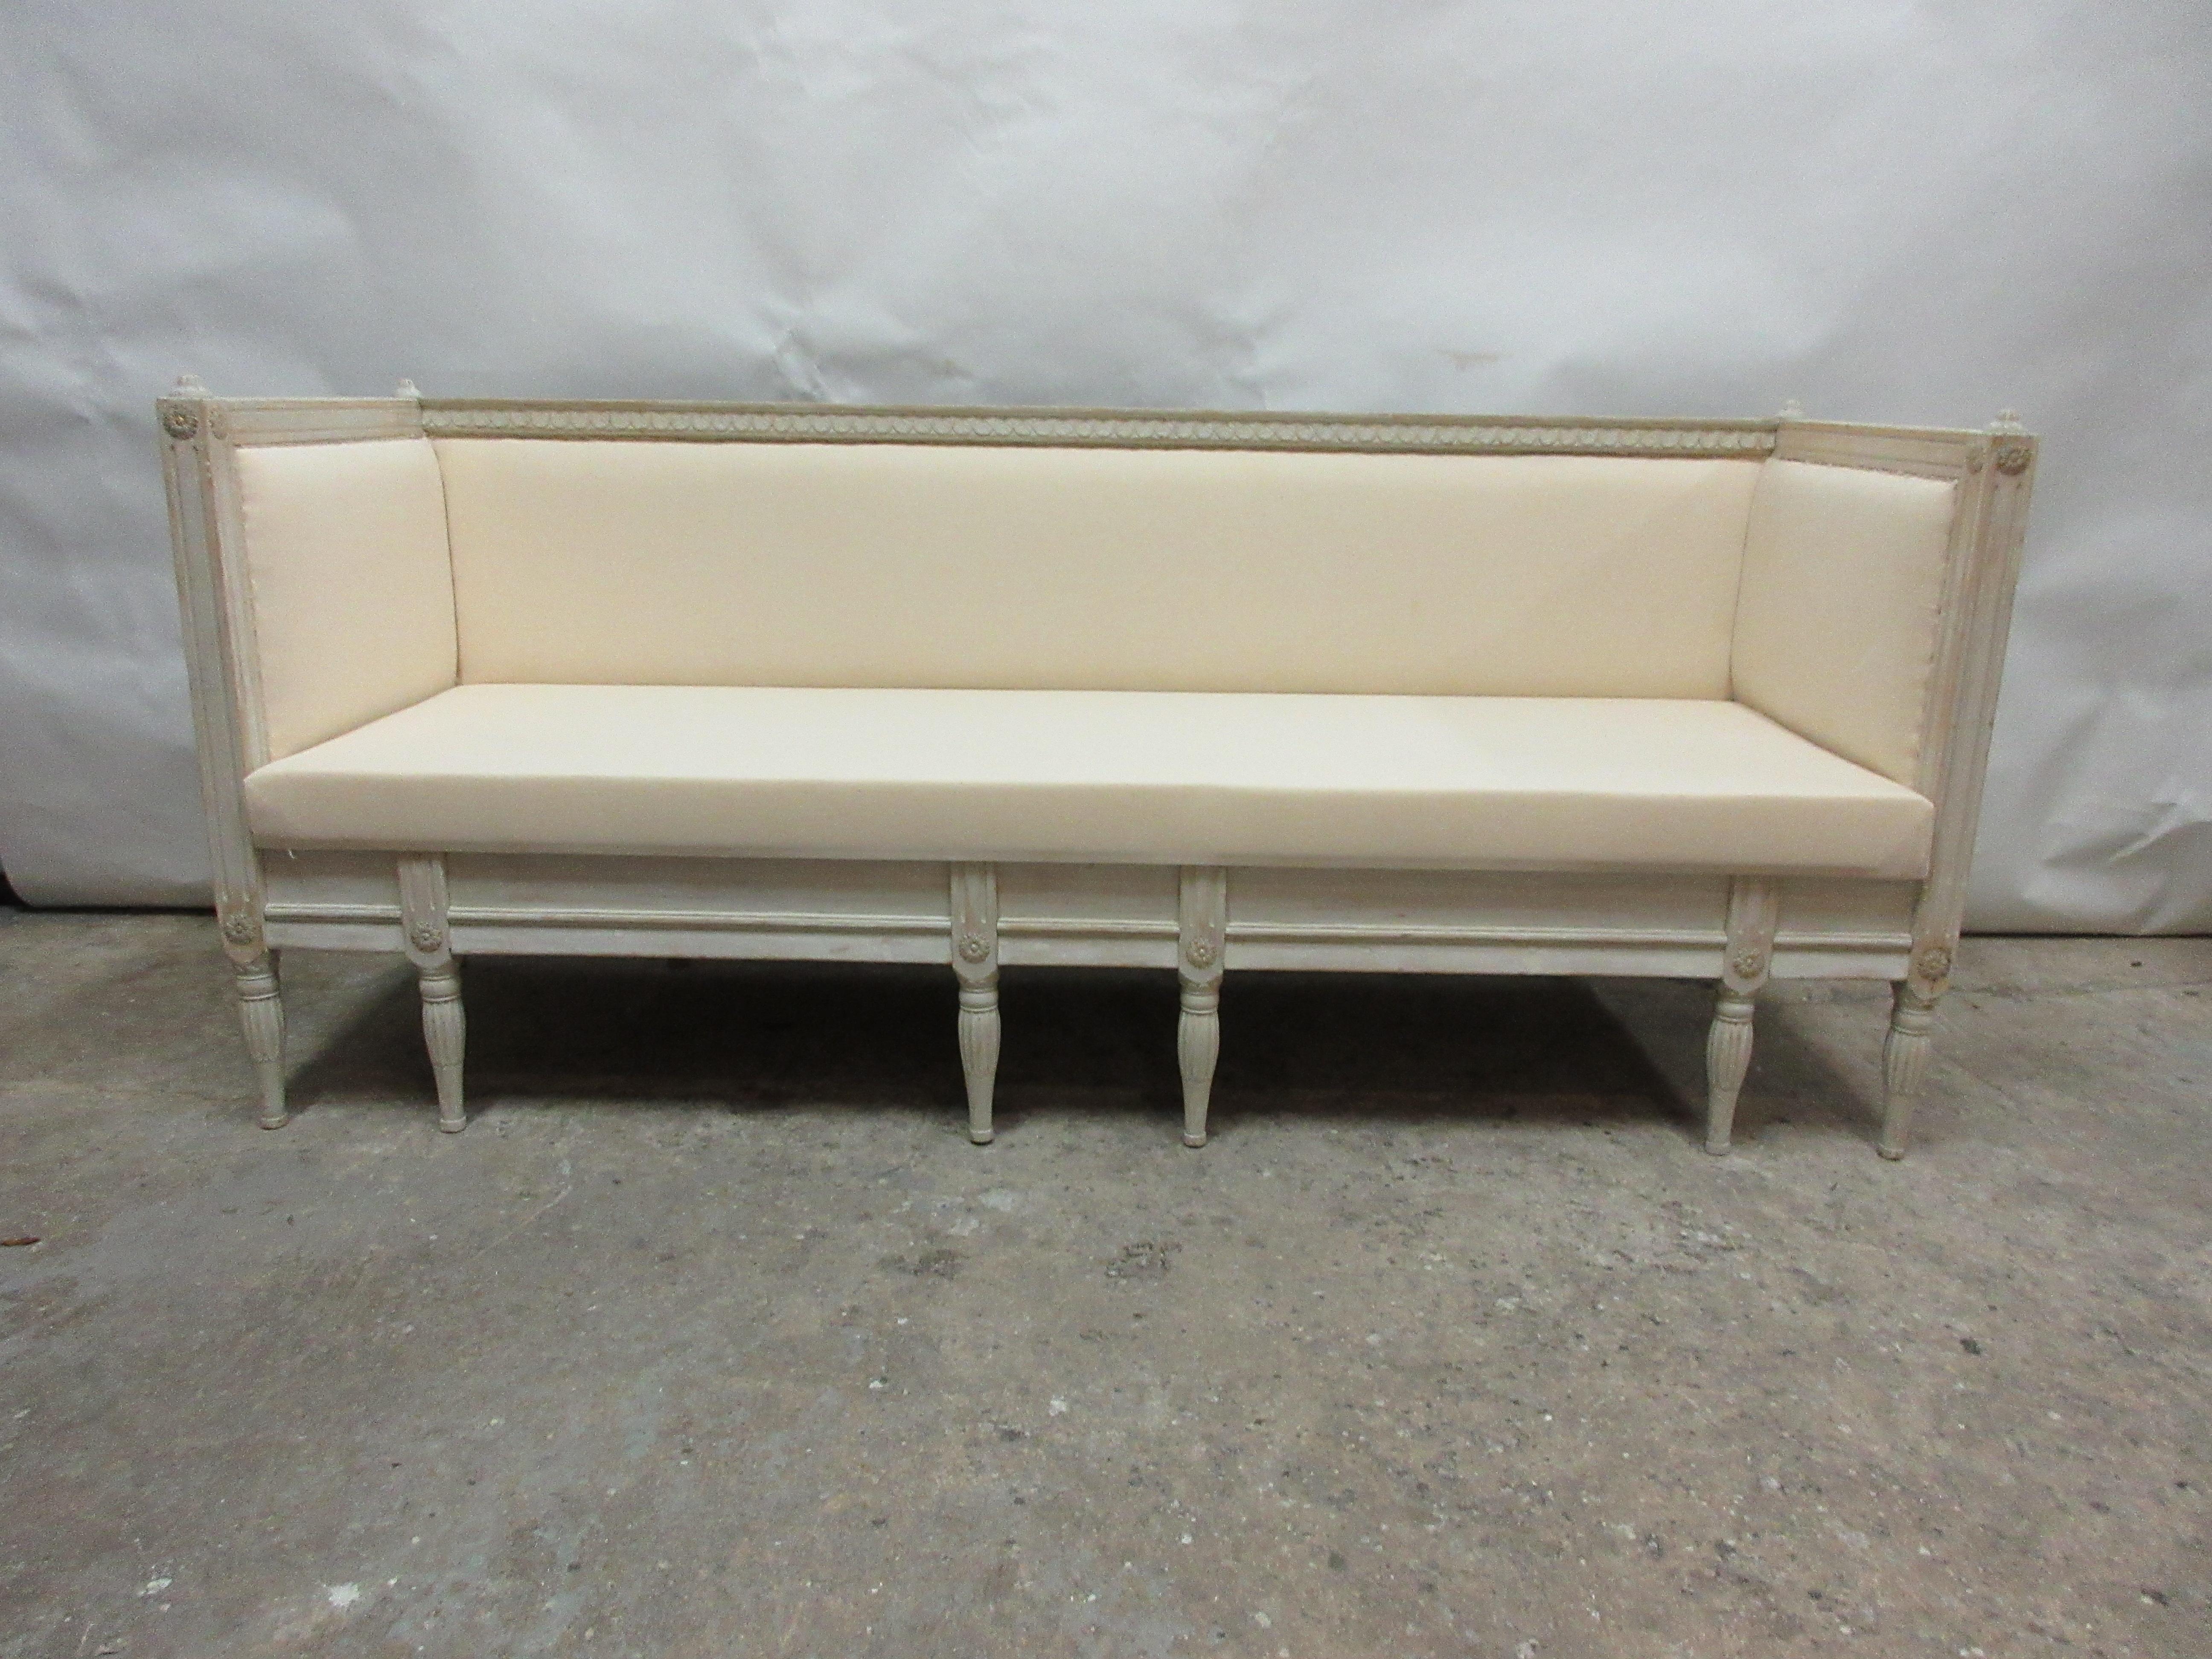 This is a 100% original painted Swedish Gustavian sofa. Seating restored and recovered in muslin.